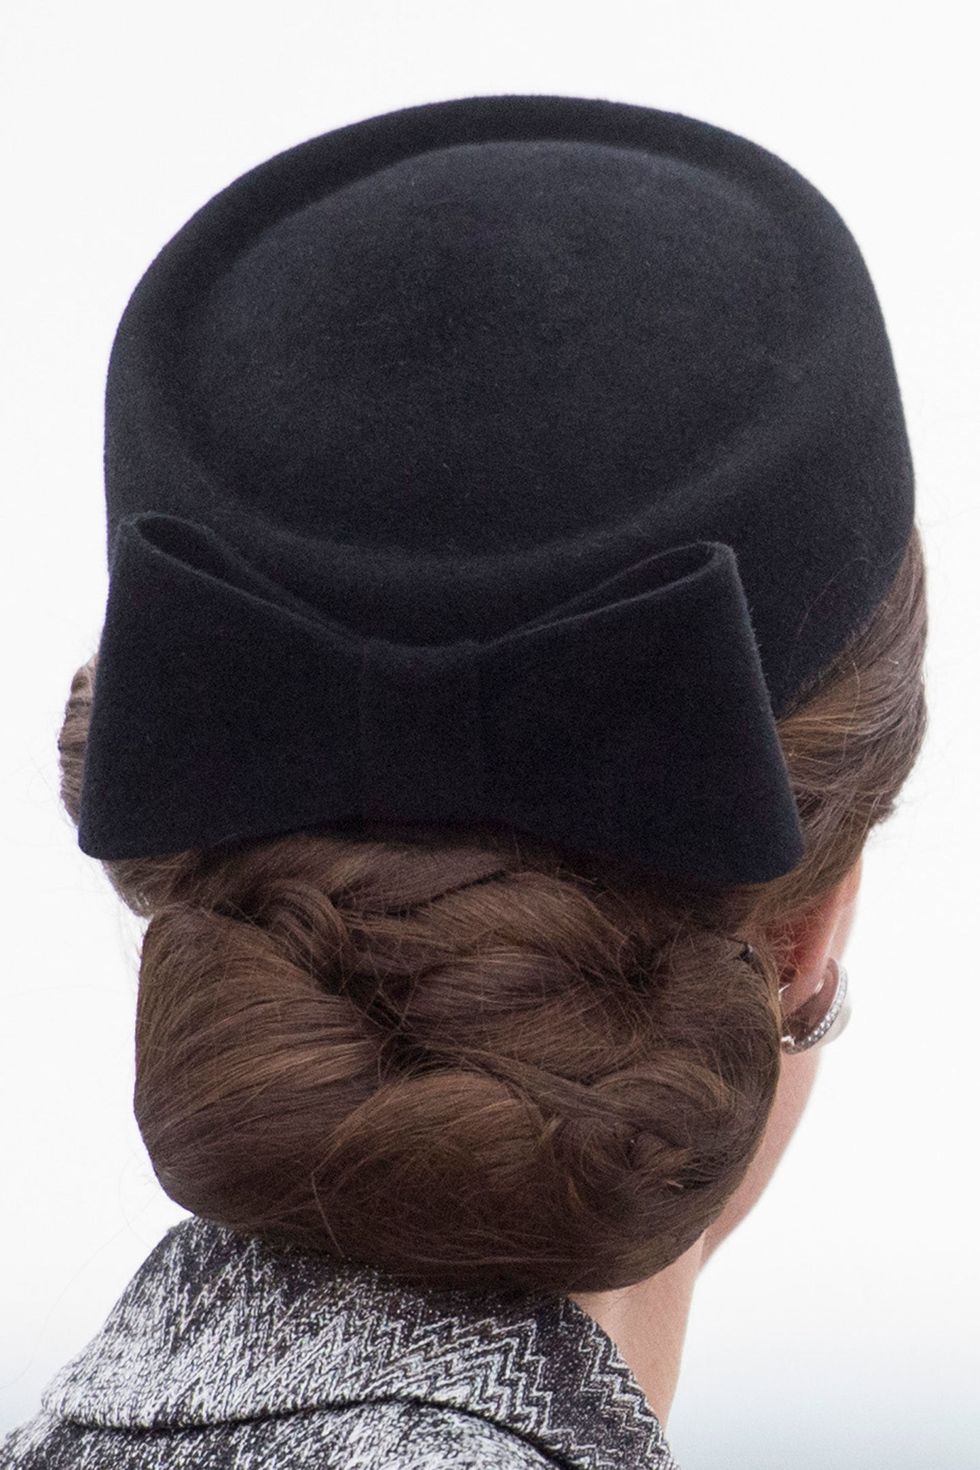 Hairstyle, Forehead, Style, Cap, Headgear, Costume accessory, Temple, Neck, Wrinkle, Wool, 